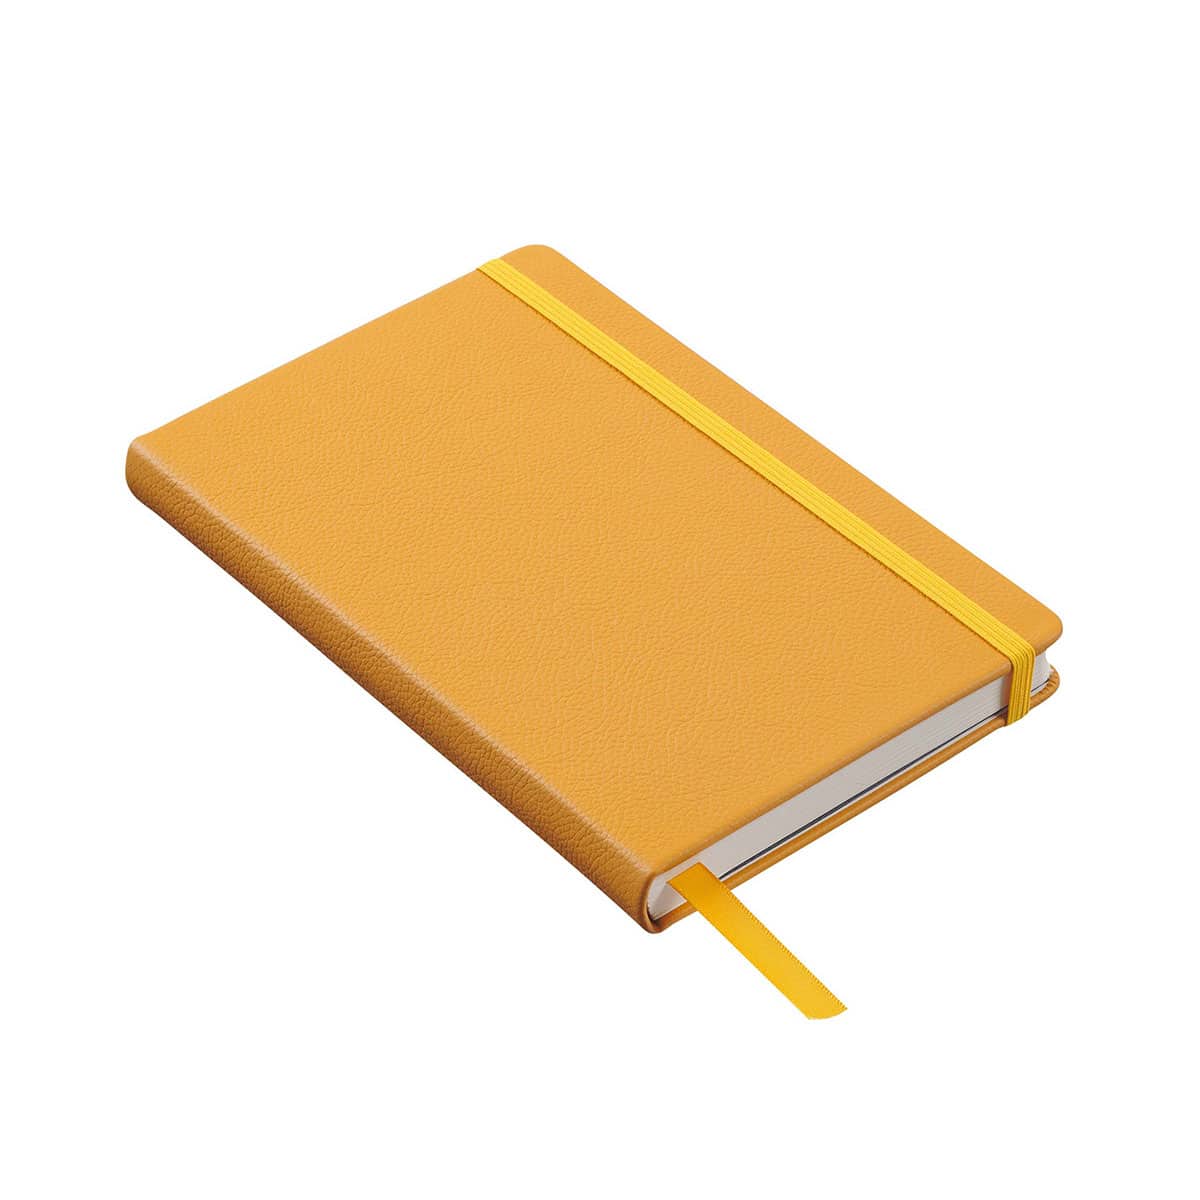 Angled view of closed front large Butter Yellow notebook with spine and bottom edge of notebook